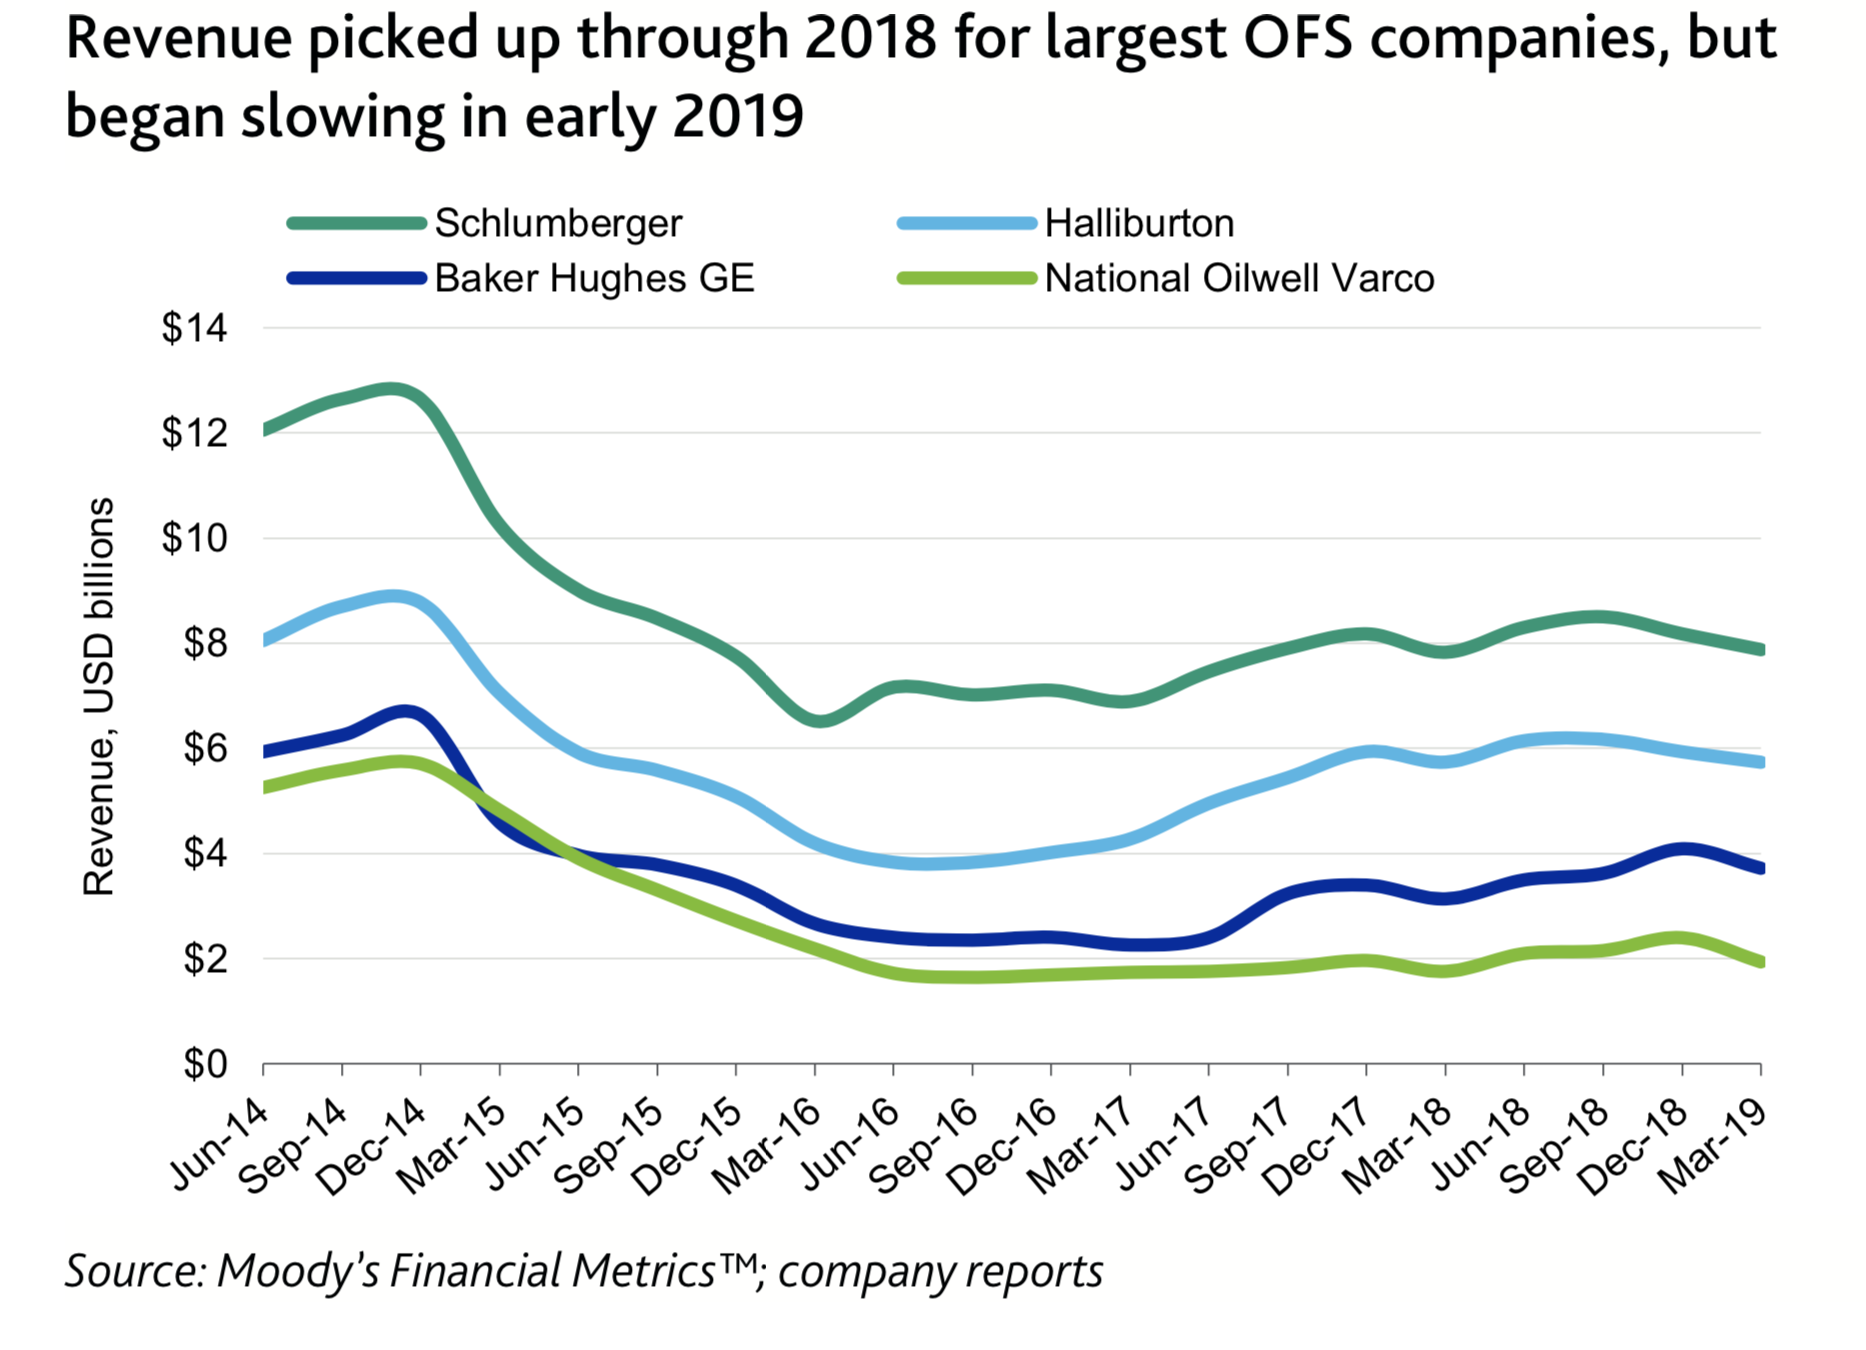 Revenue picked up through 2018 for largest OFS companies, but began slowing in early 2019 (Source: Moody’s Financial Metrics; company reports)